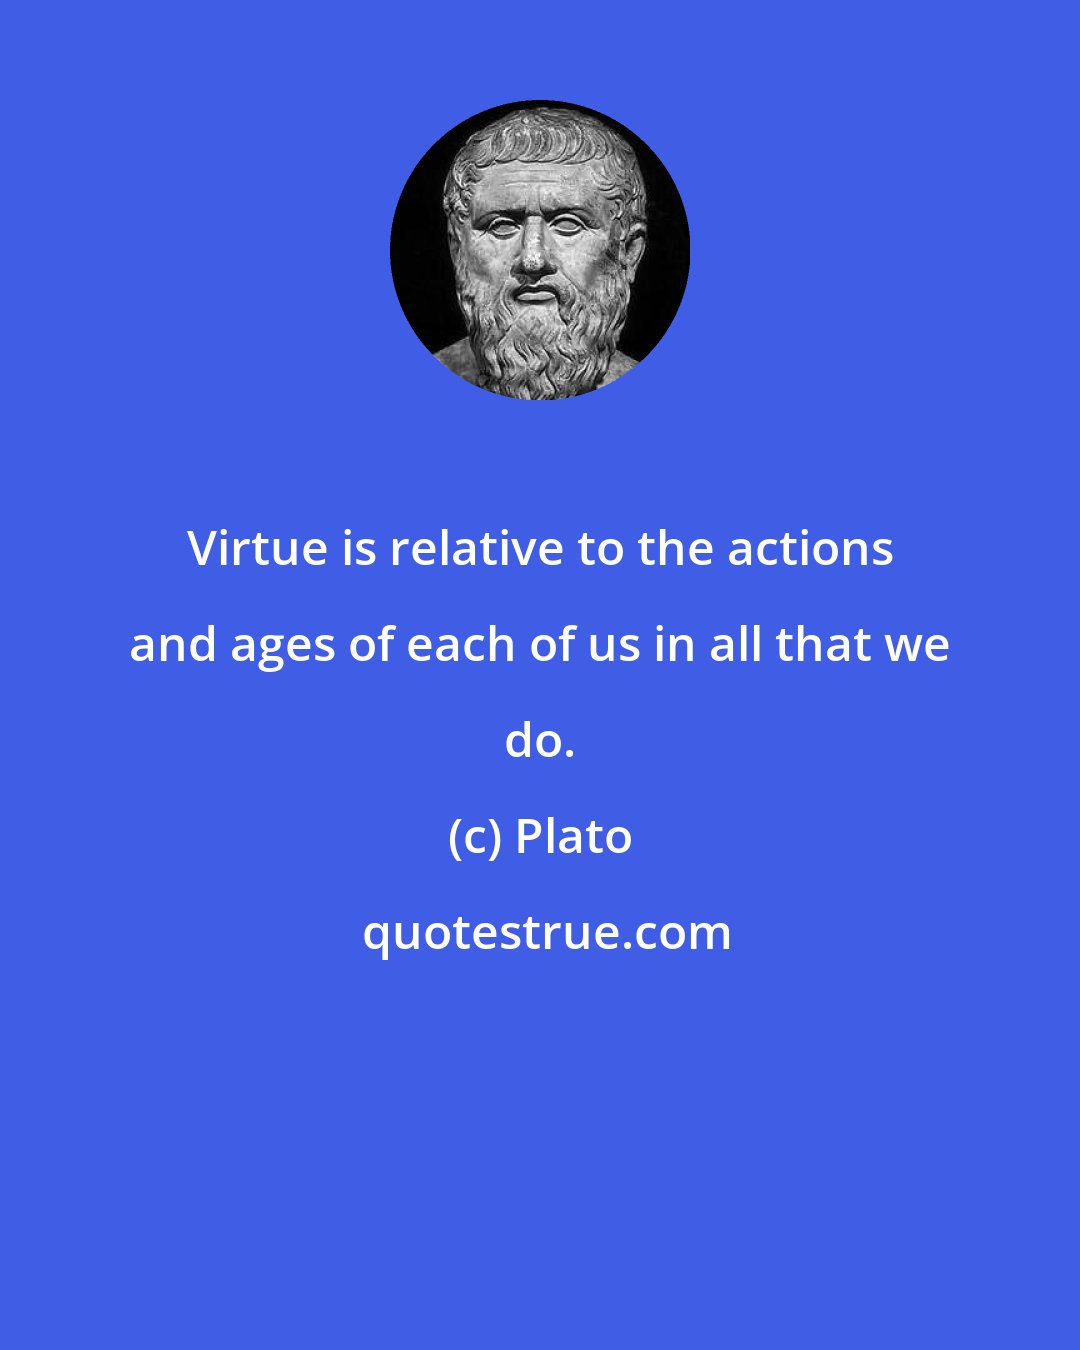 Plato: Virtue is relative to the actions and ages of each of us in all that we do.